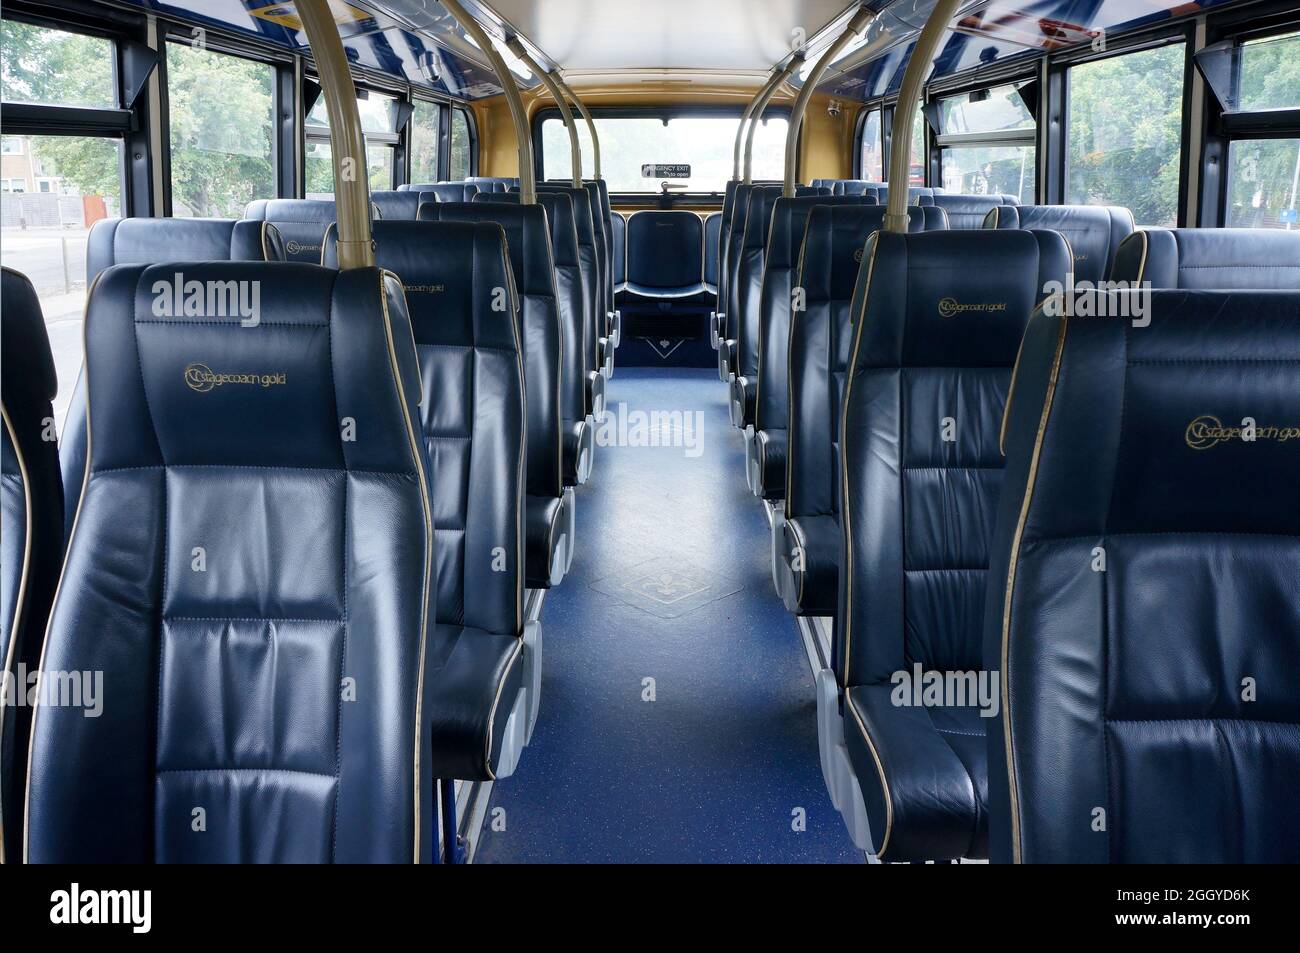 Inside the top deck of an empty Stagecoach gold double decker bus with faux leather seating Stock Photo